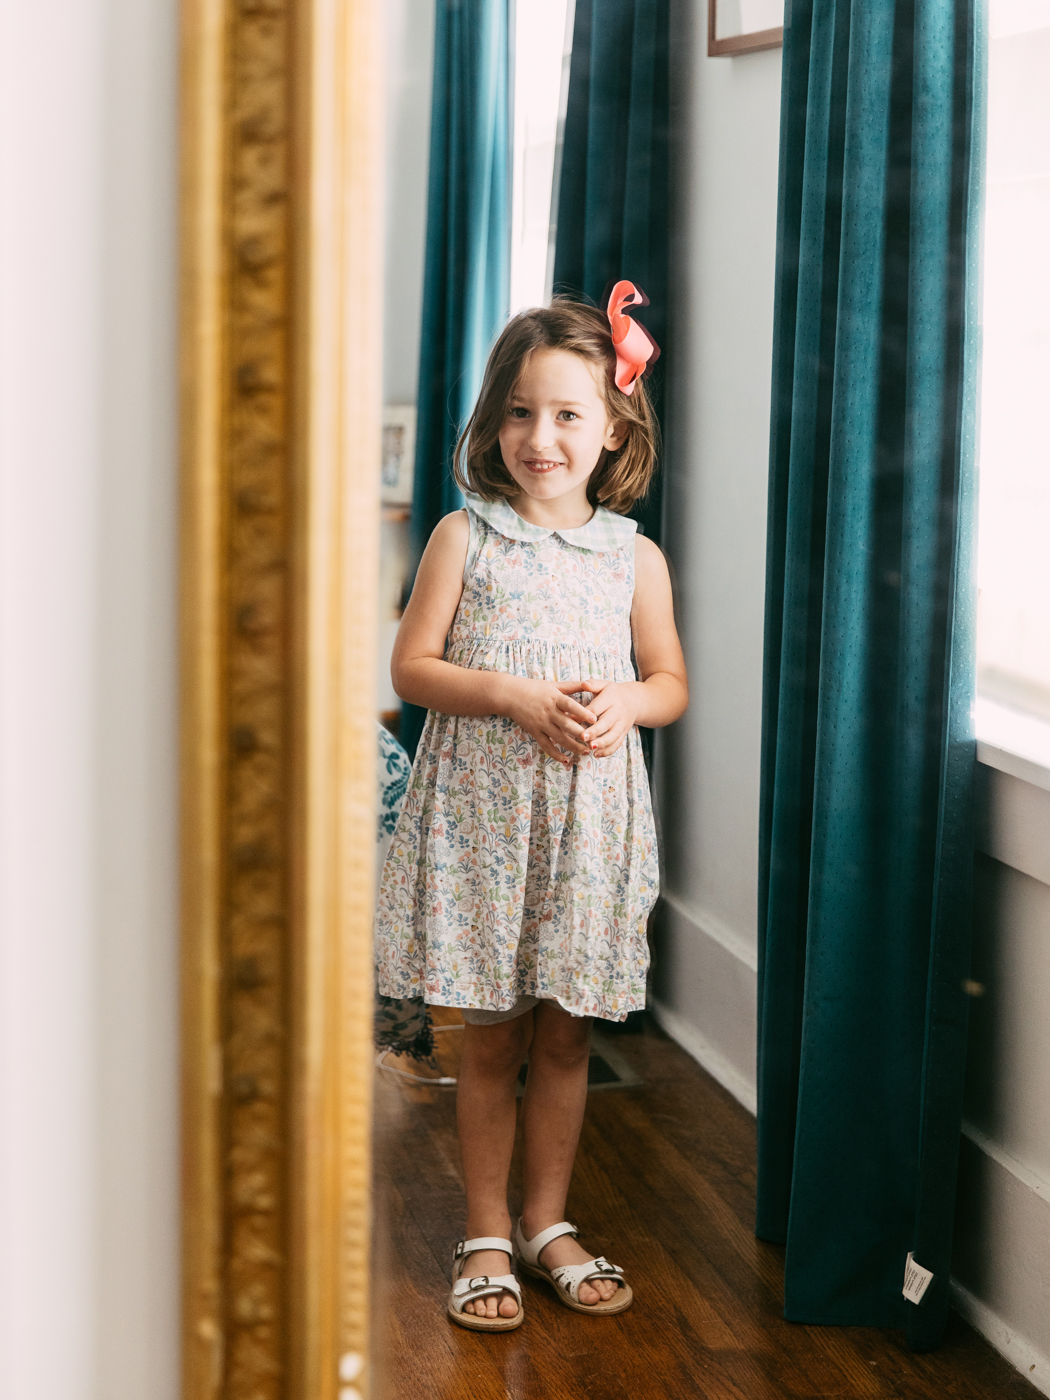 Antique Pier Mirror by popular Memphis life and style blog, Lone Star Looking Glass: image of a little girls wearing a pair white sandals, pink hair bow and floral pink dress and looking at herself in a antique pier mirror. 